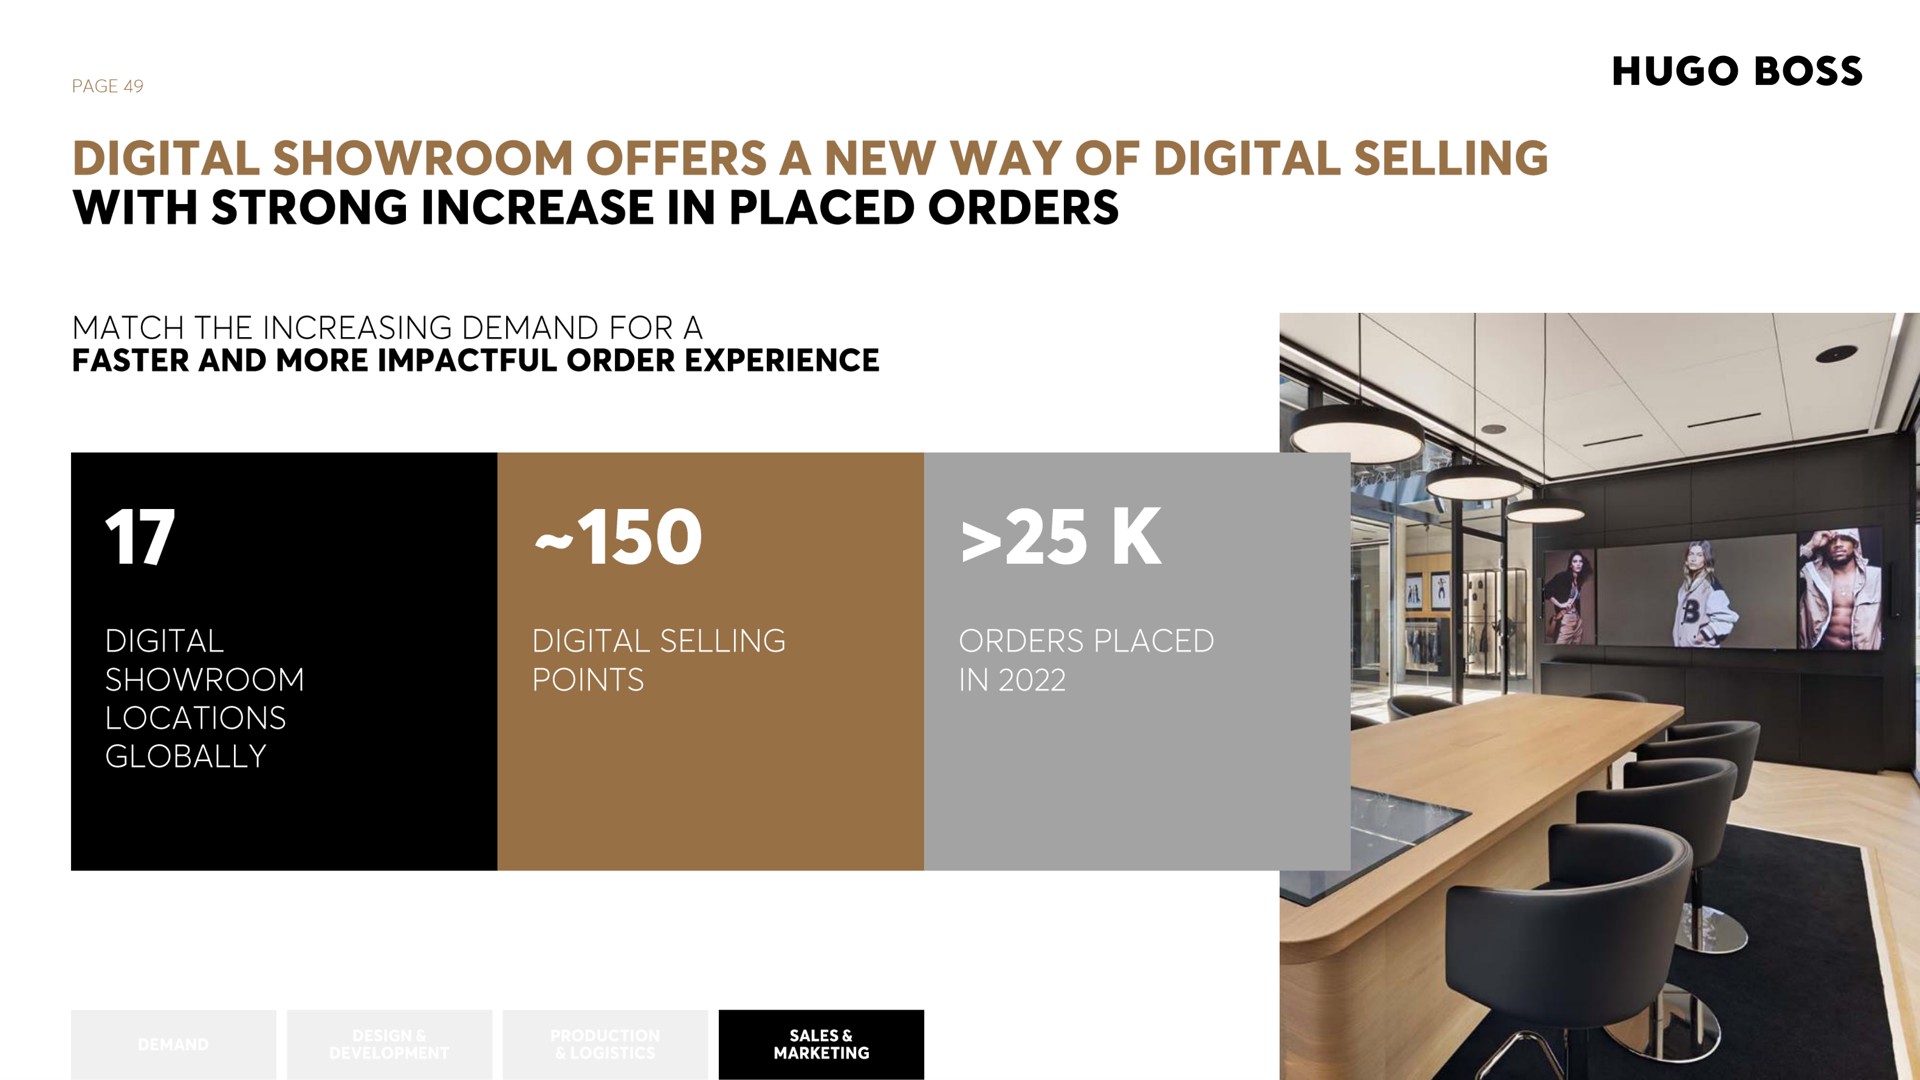 boss match the increasing demand for a faster and more order experience digital showroom offers a new way of digital selling with strong increase in placed orders globally digital showroom locations digital selling points | Hugo Boss